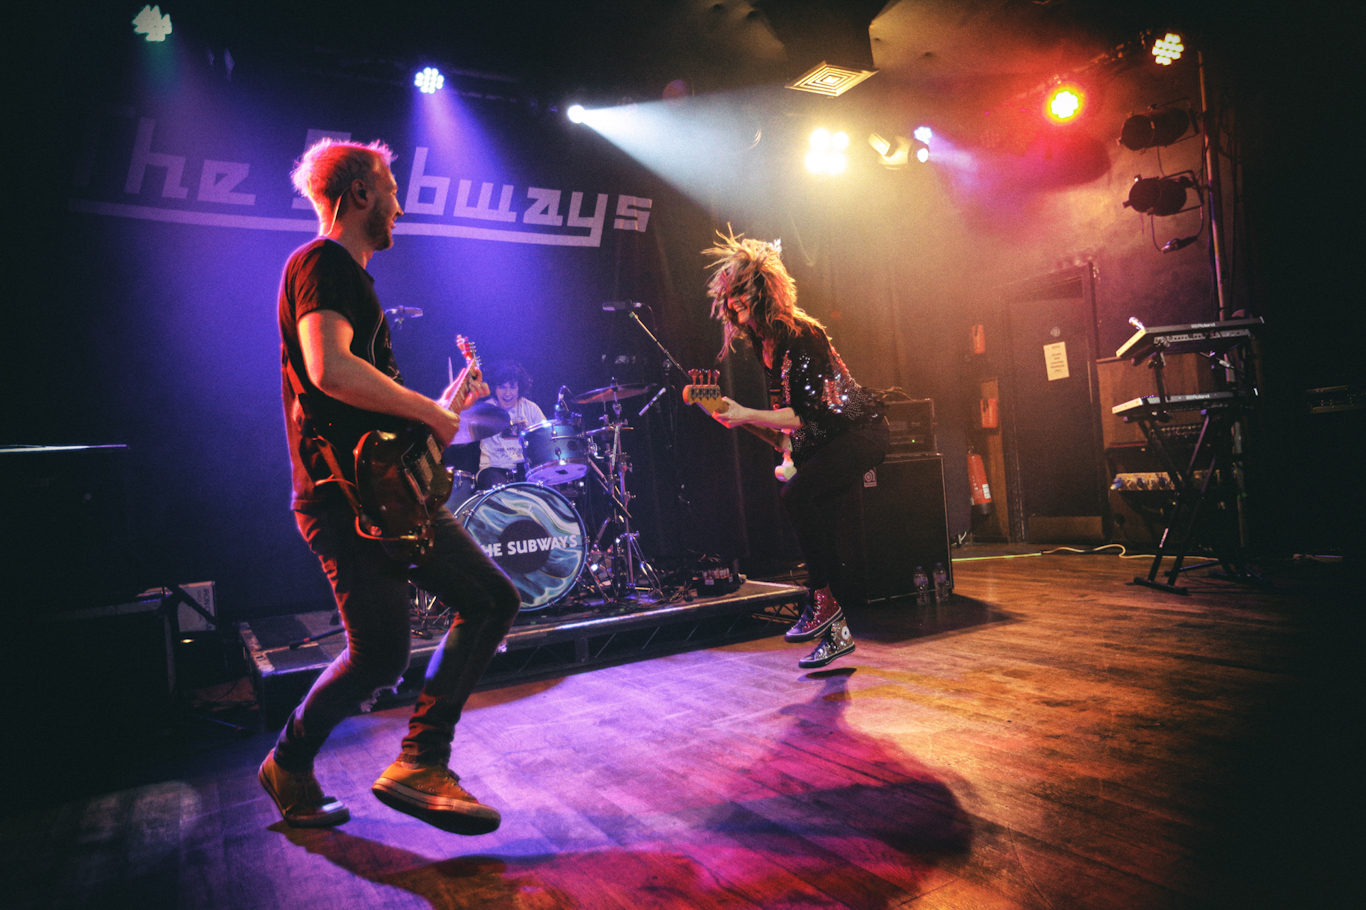 IN FOCUS// The Subways at Scala, London